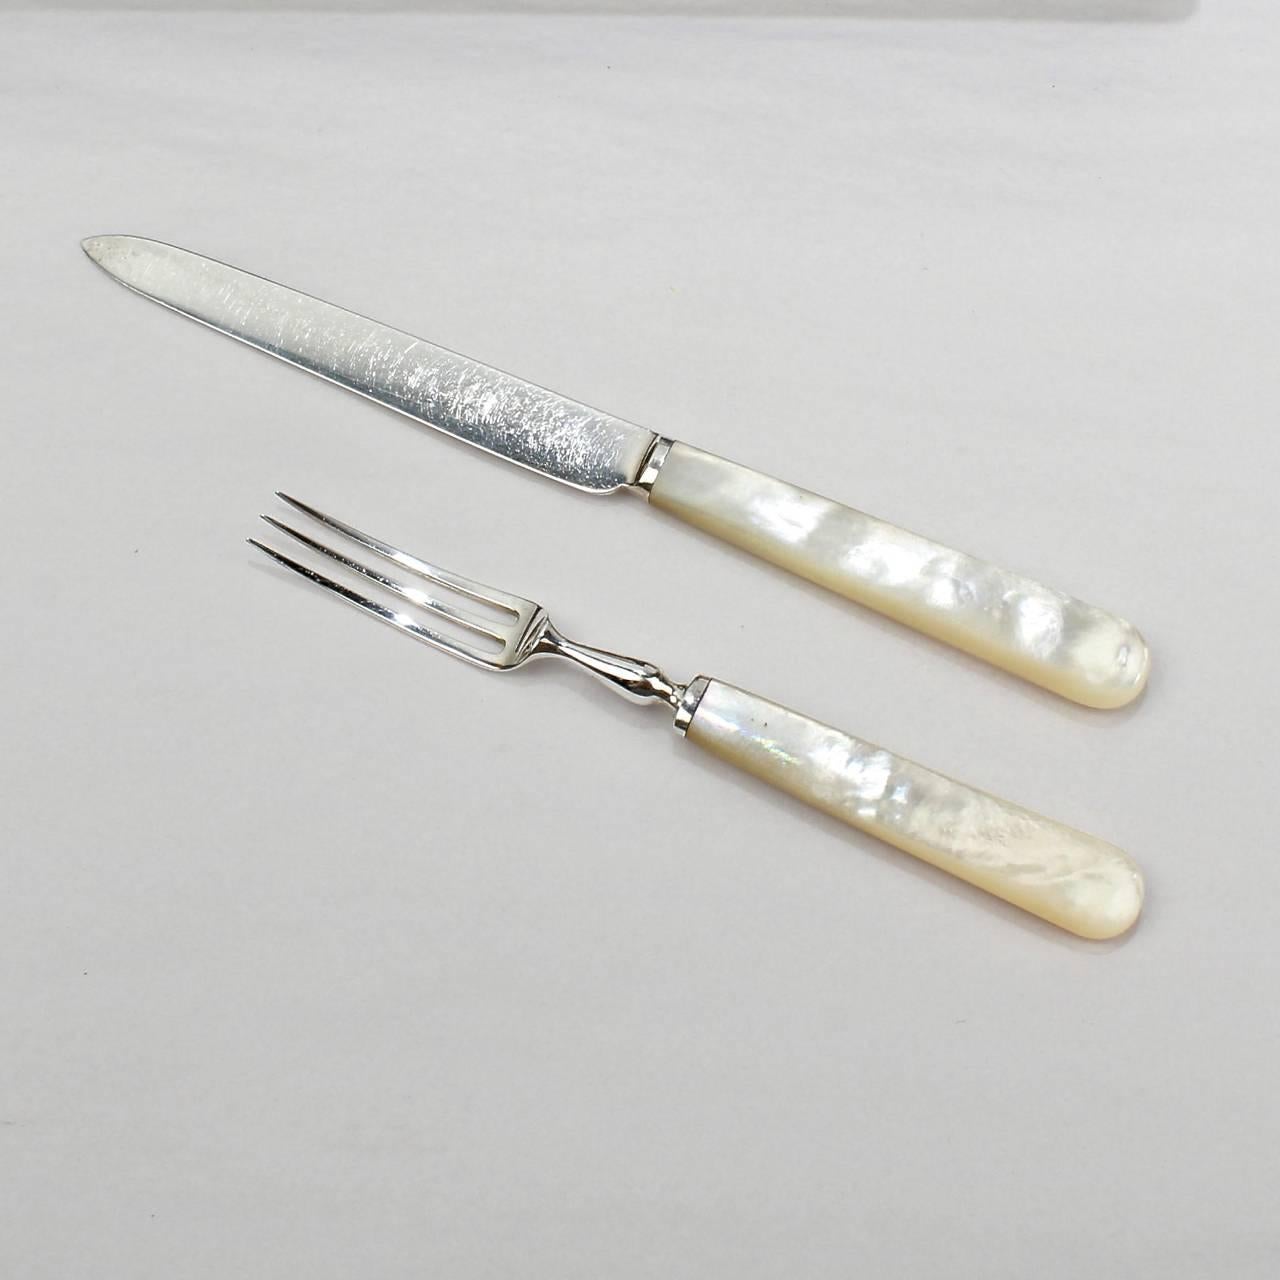 English Antique Mappin & Webb Sterling Silver and Mother-of-pearl Fruit or Dessert Set